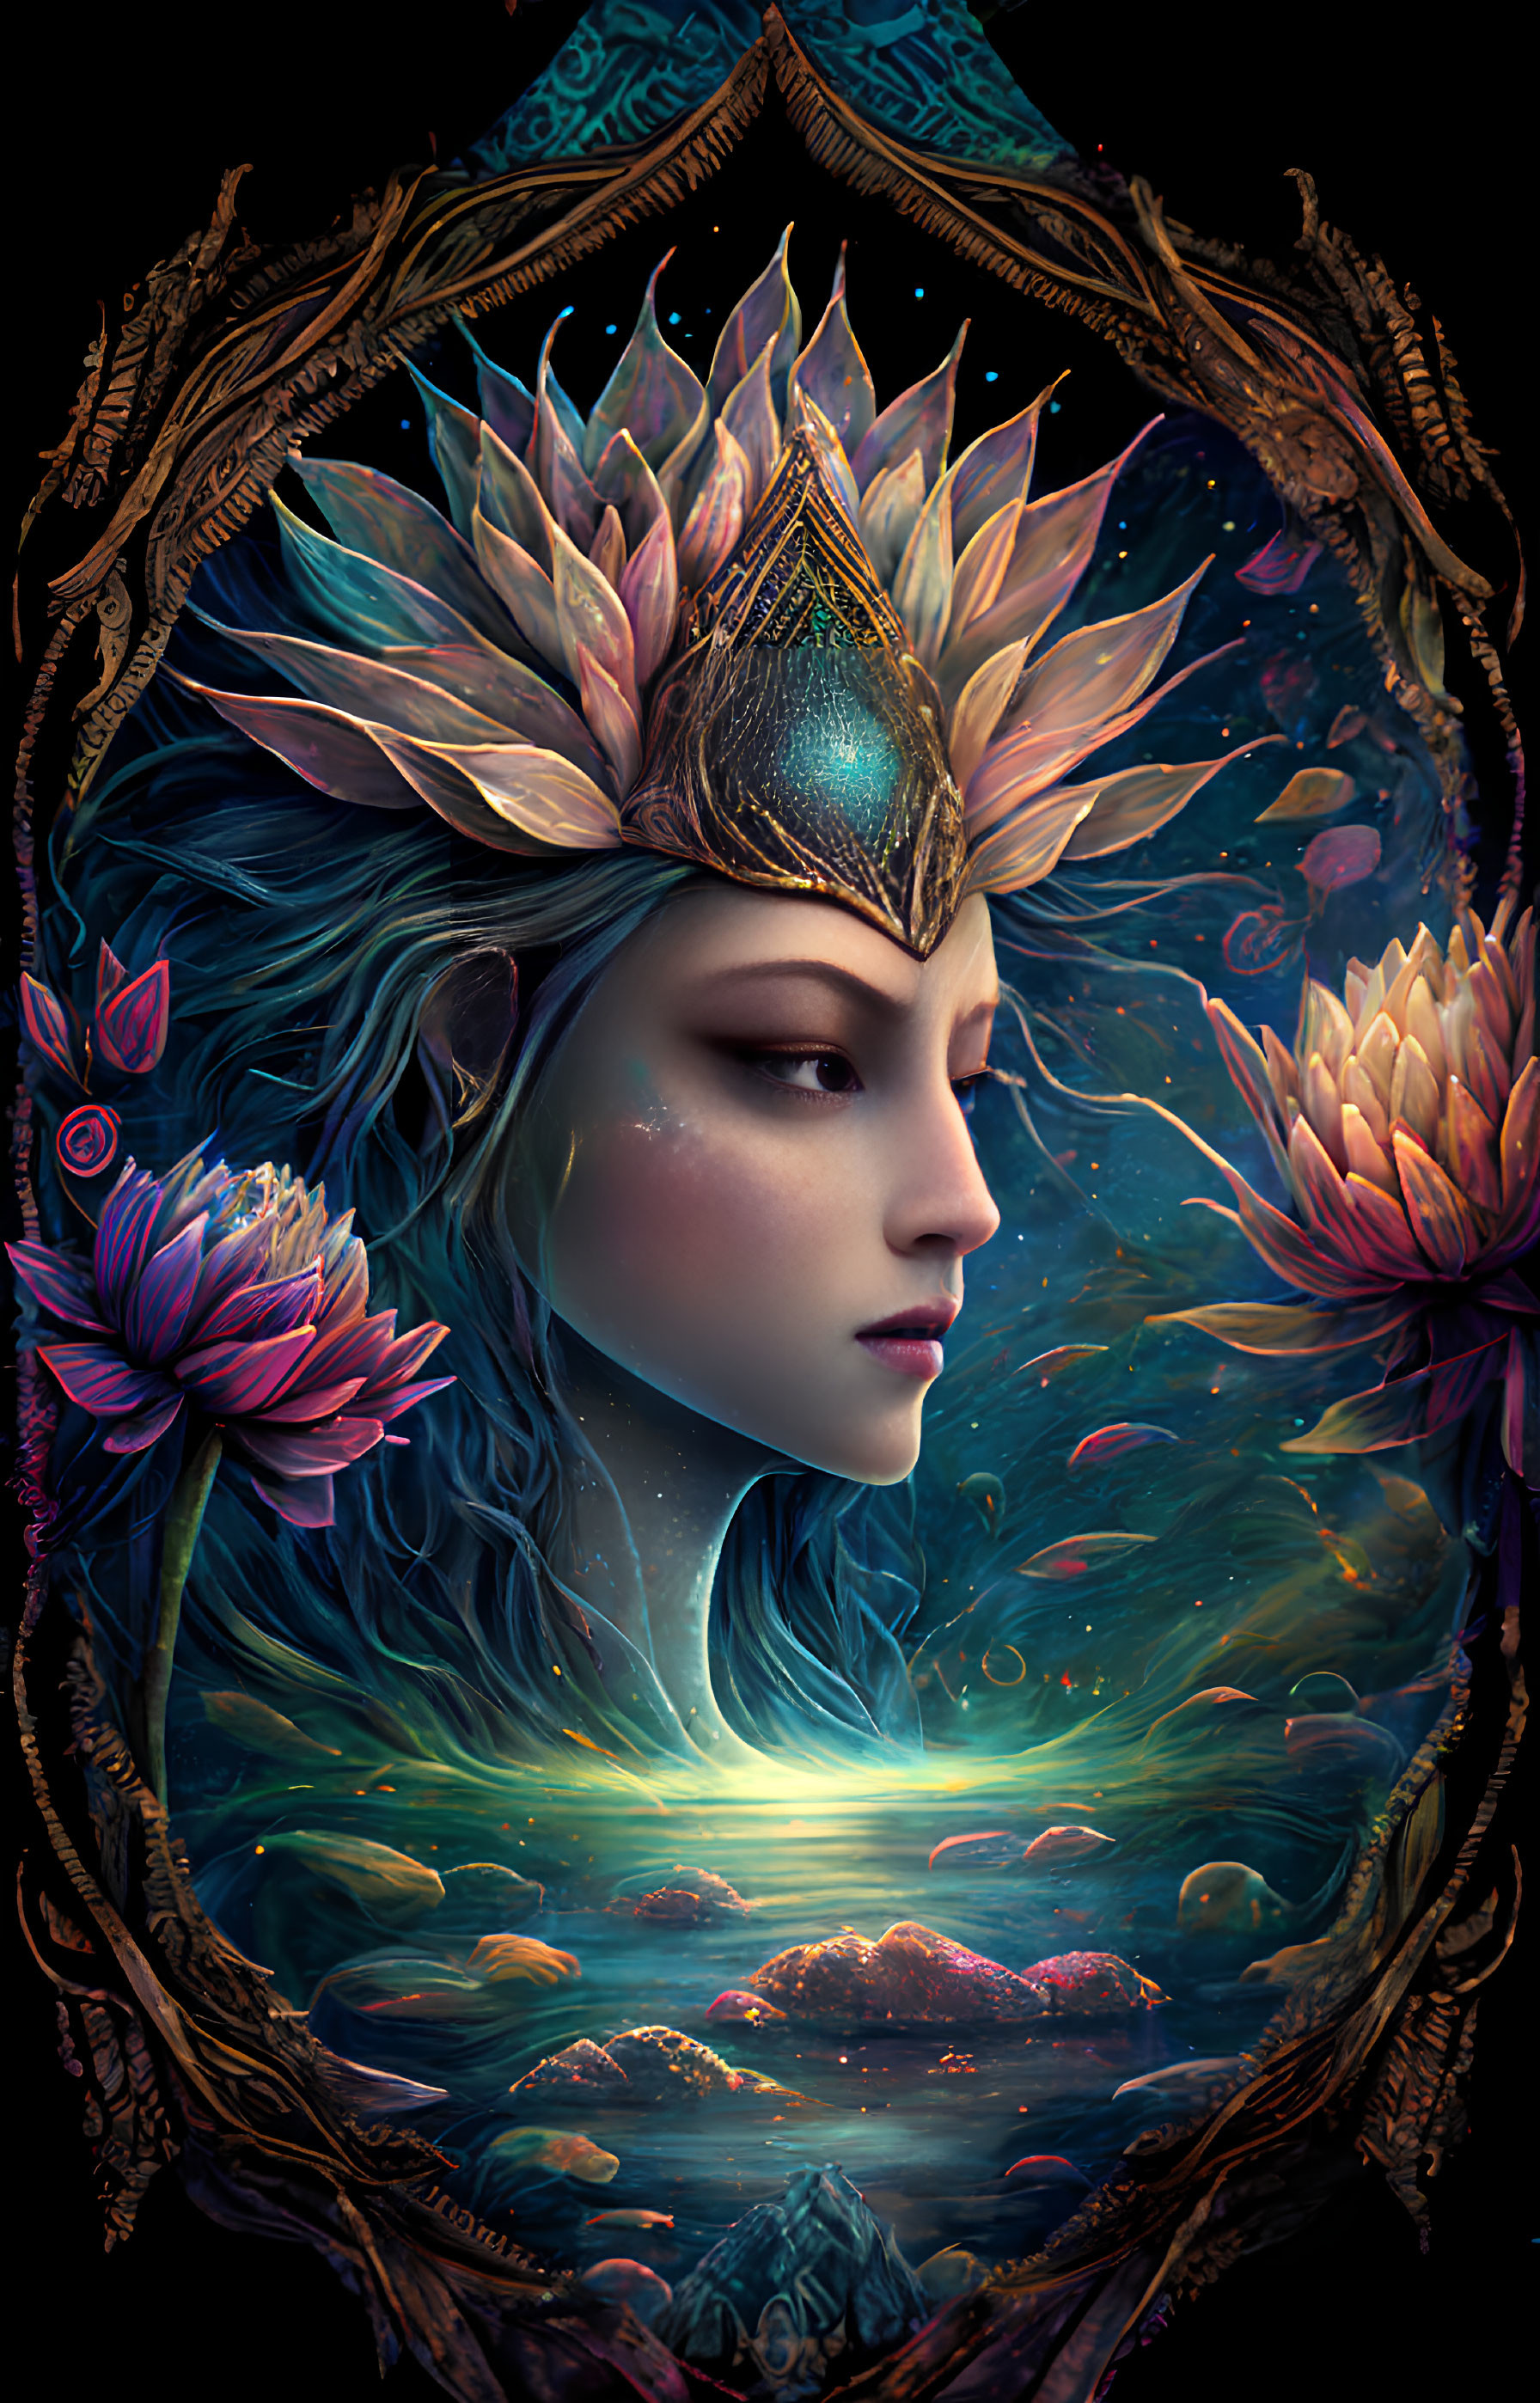 Fantasy-themed illustration of woman with golden crown and water lilies in ornate oval frame